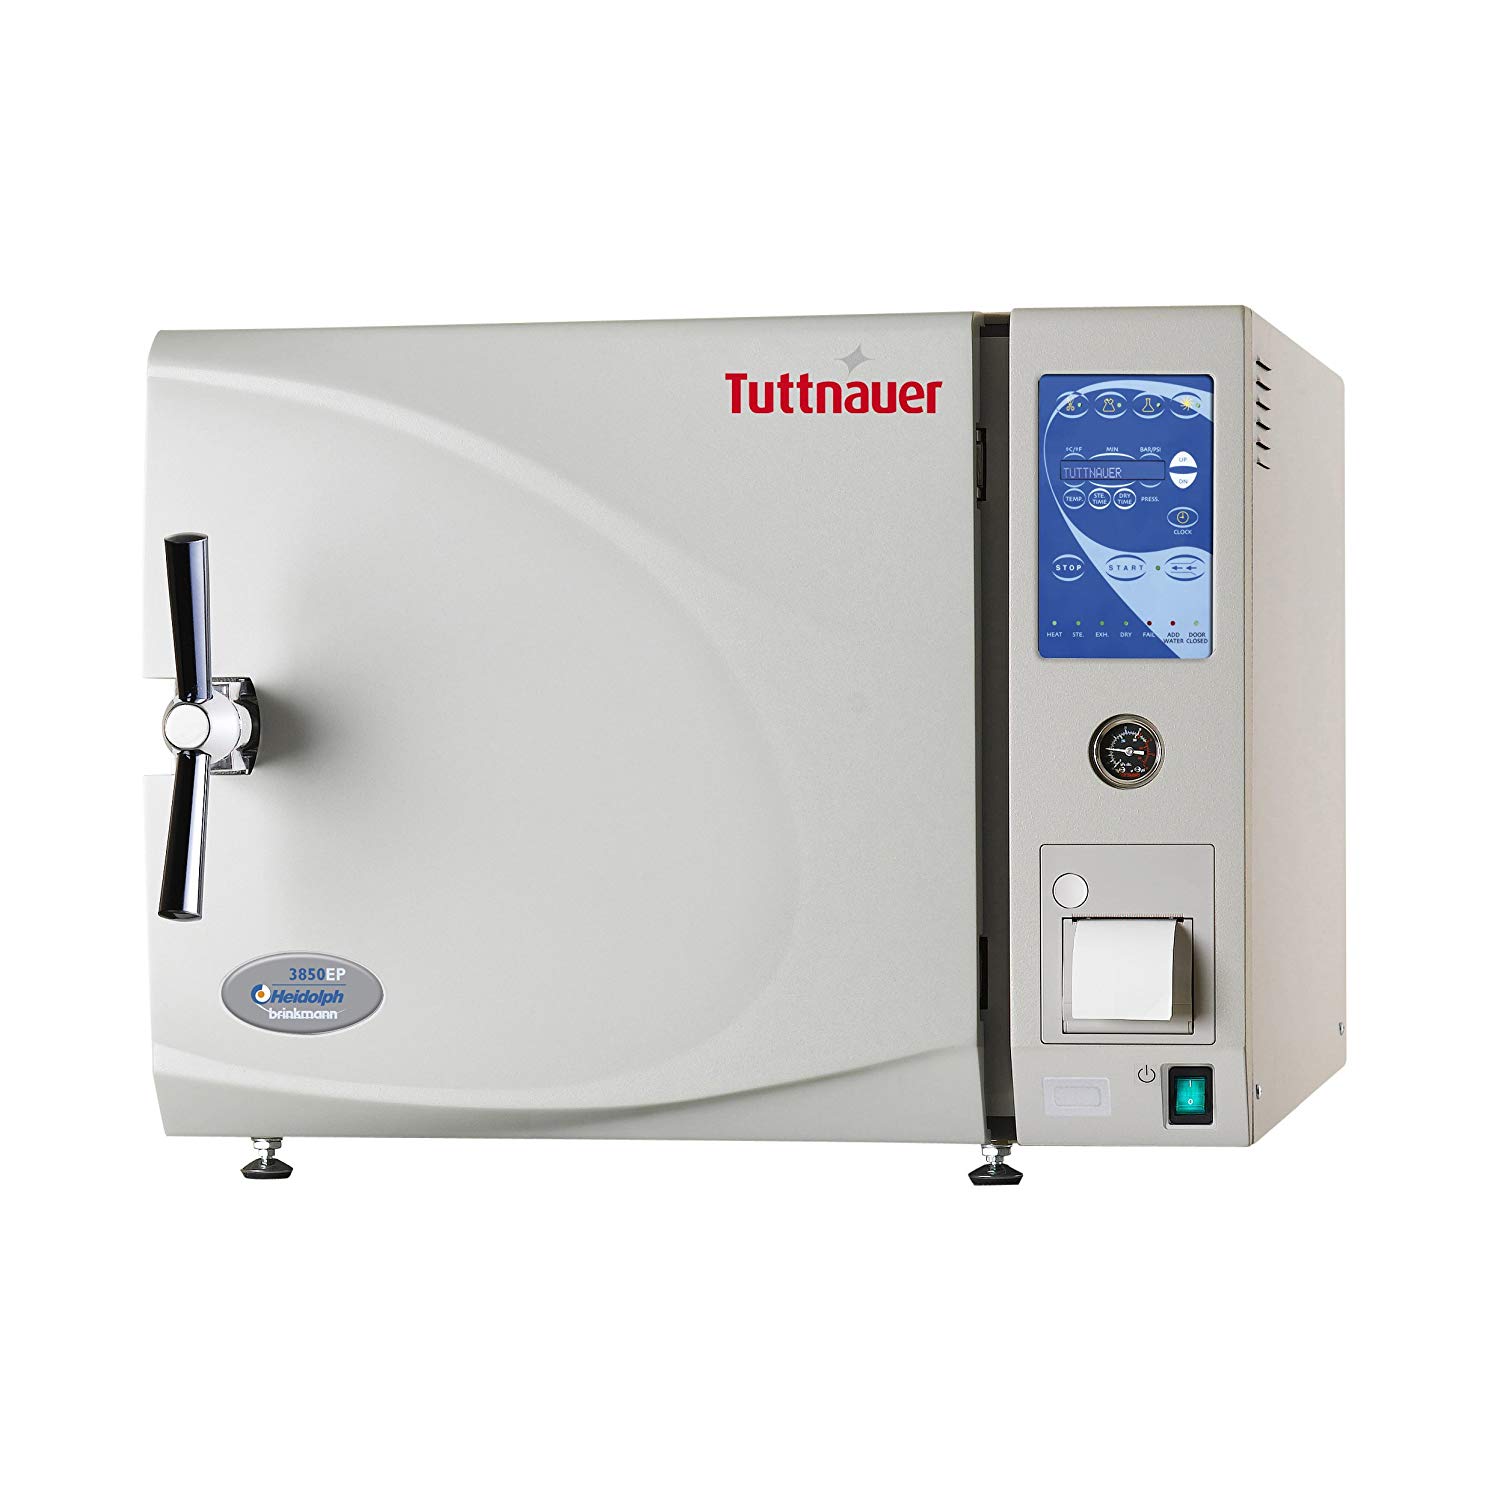 Vertical Autoclaves for Life Sciences - Laboratory Autoclaves